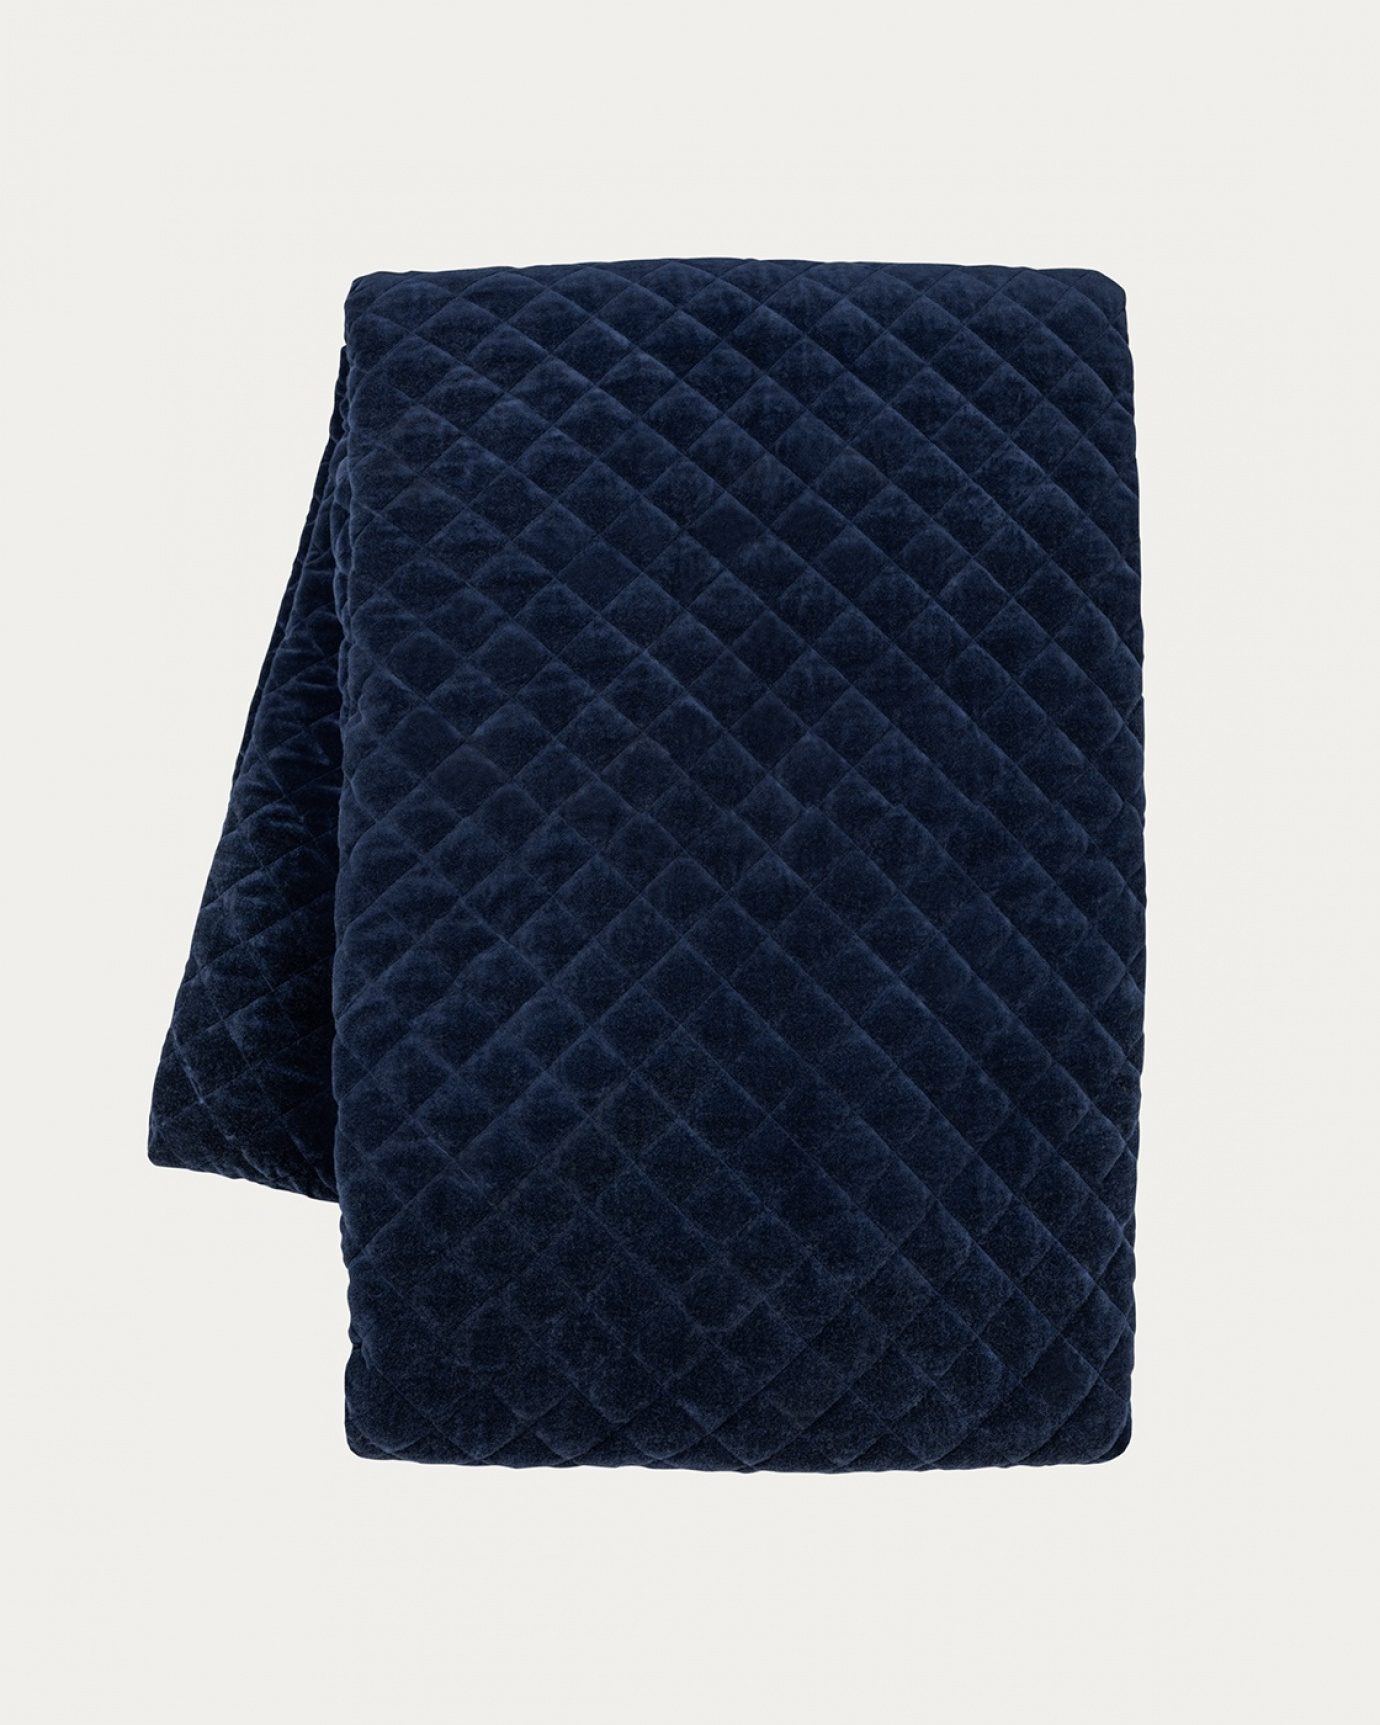 Product image ink blue PICCOLO bedspread in soft cotton velvet for single bed from LINUM DESIGN. Size 170x260 cm.